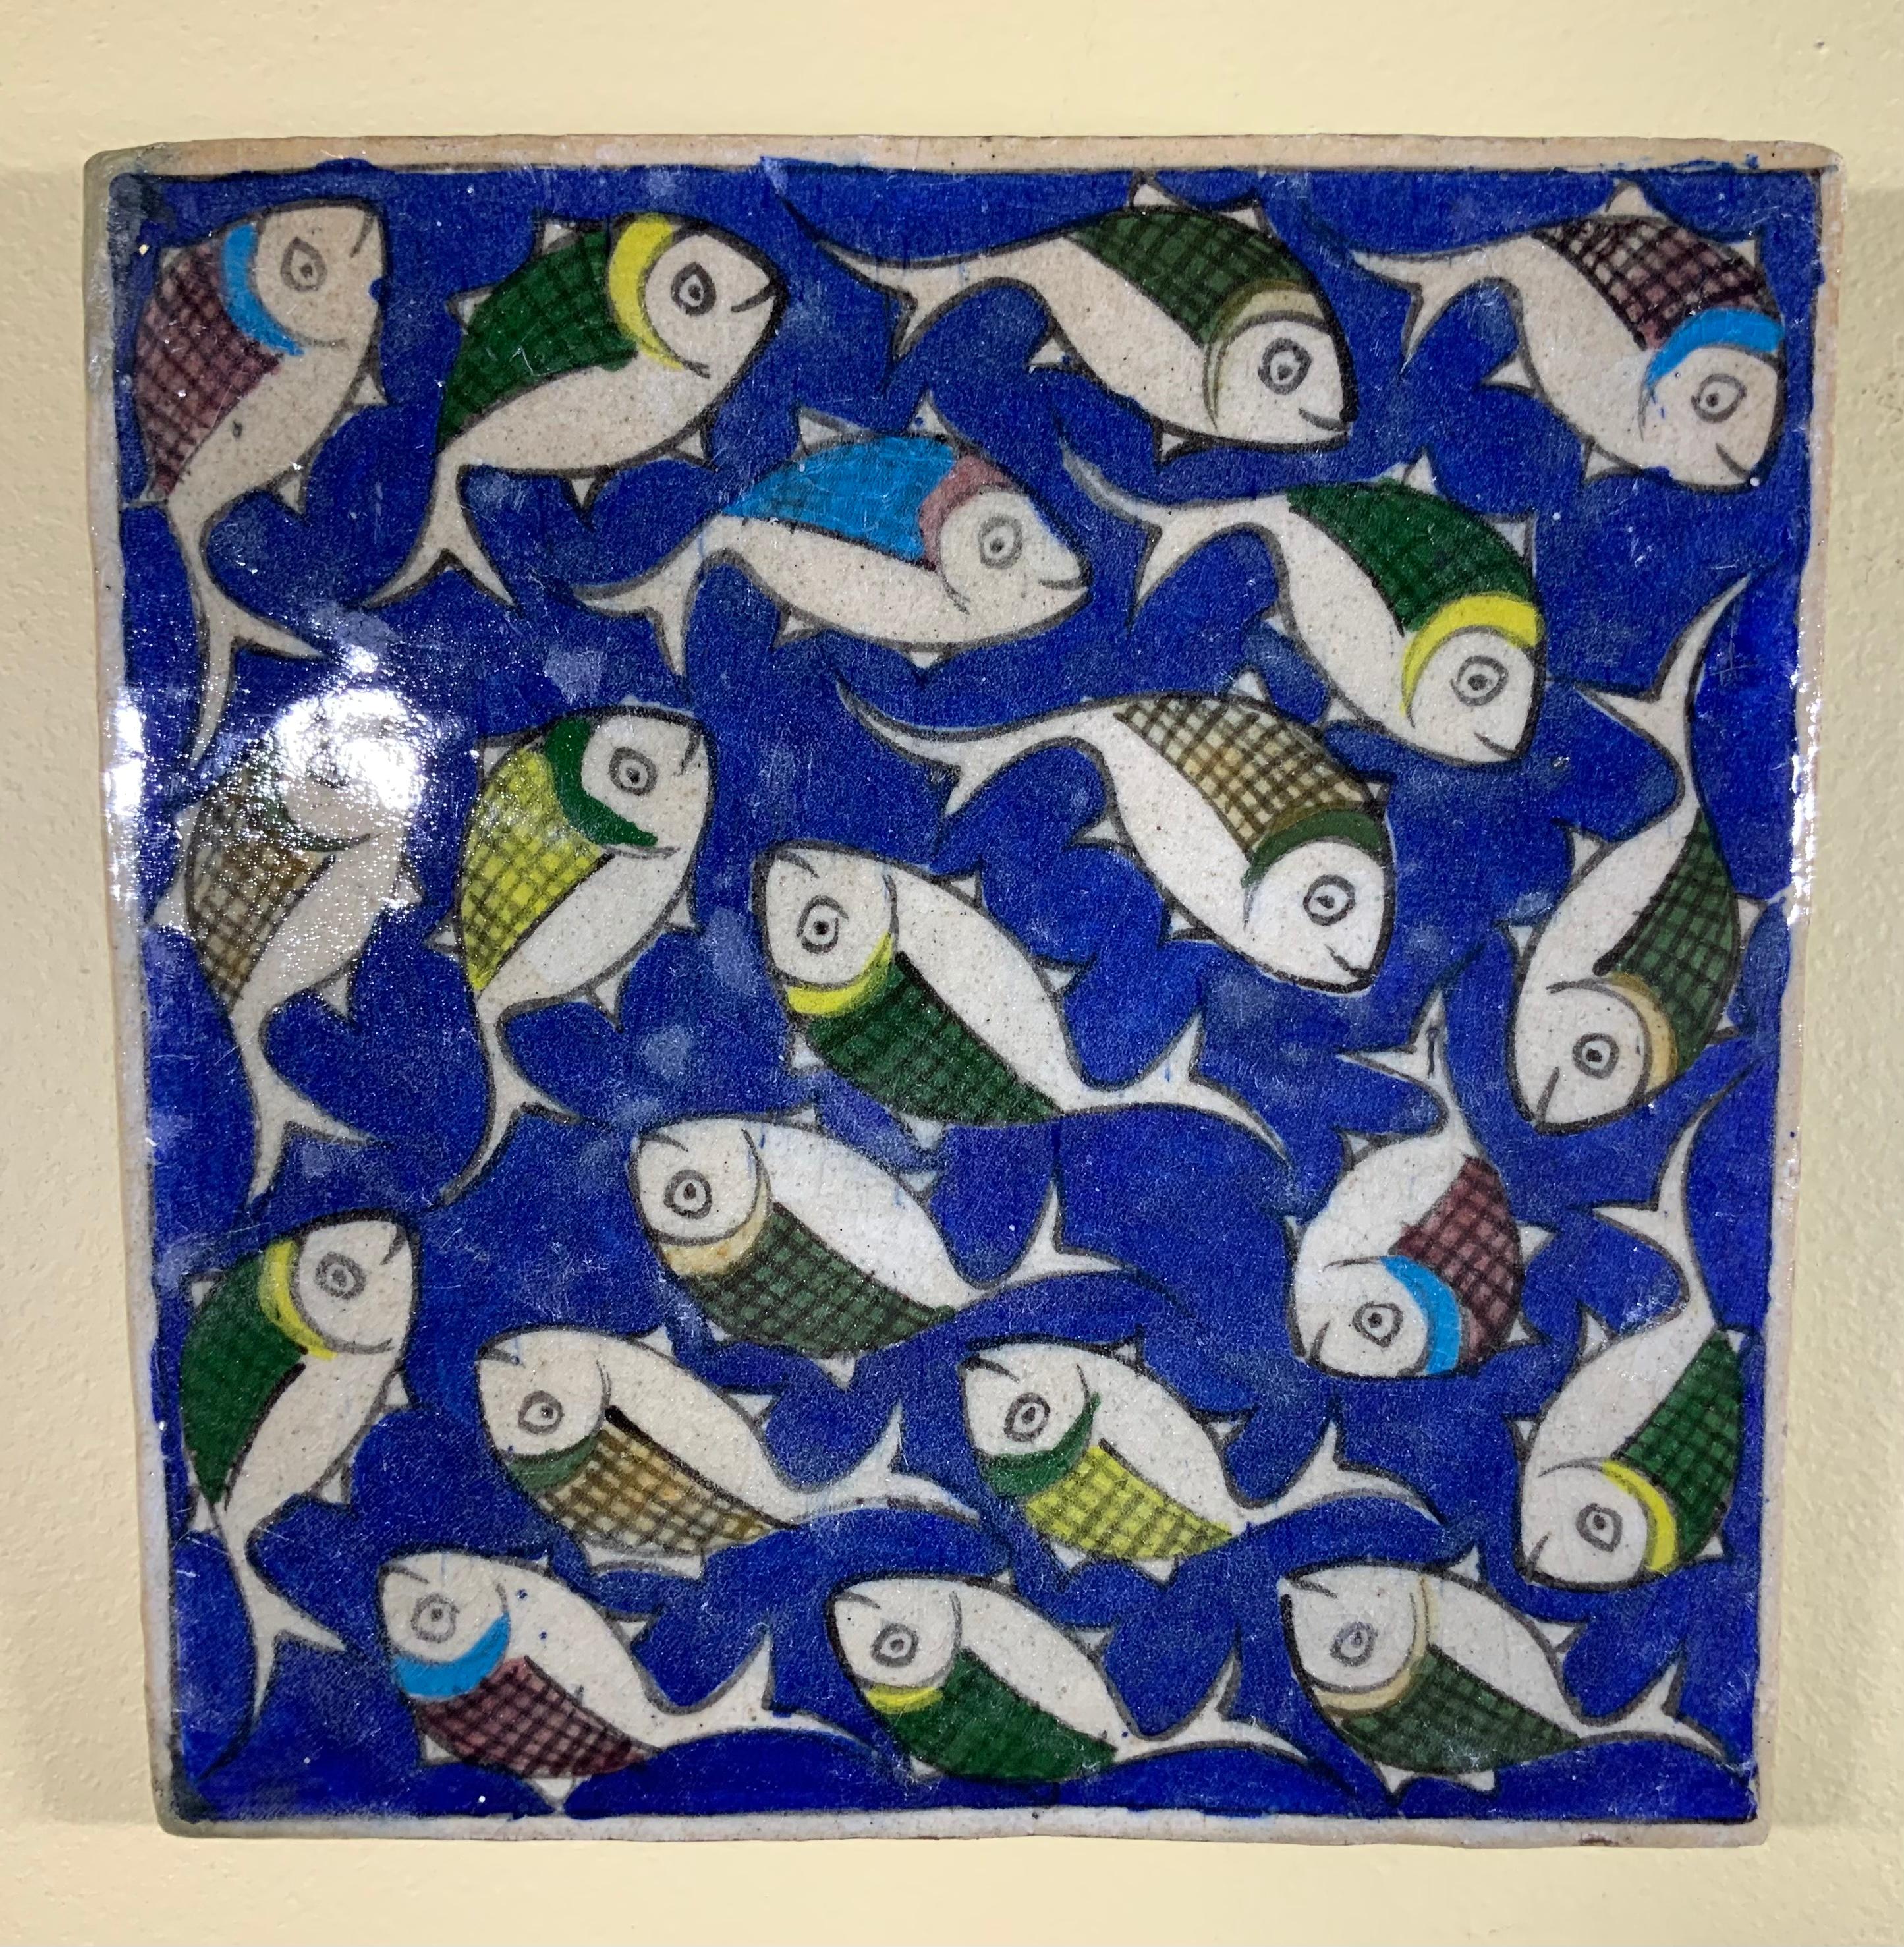 Beautiful tile hand painted and glazed with exceptional wondering colorful school of fish on a blue color background. The tile can hang on the wall. Exceptional object of art for wall display.